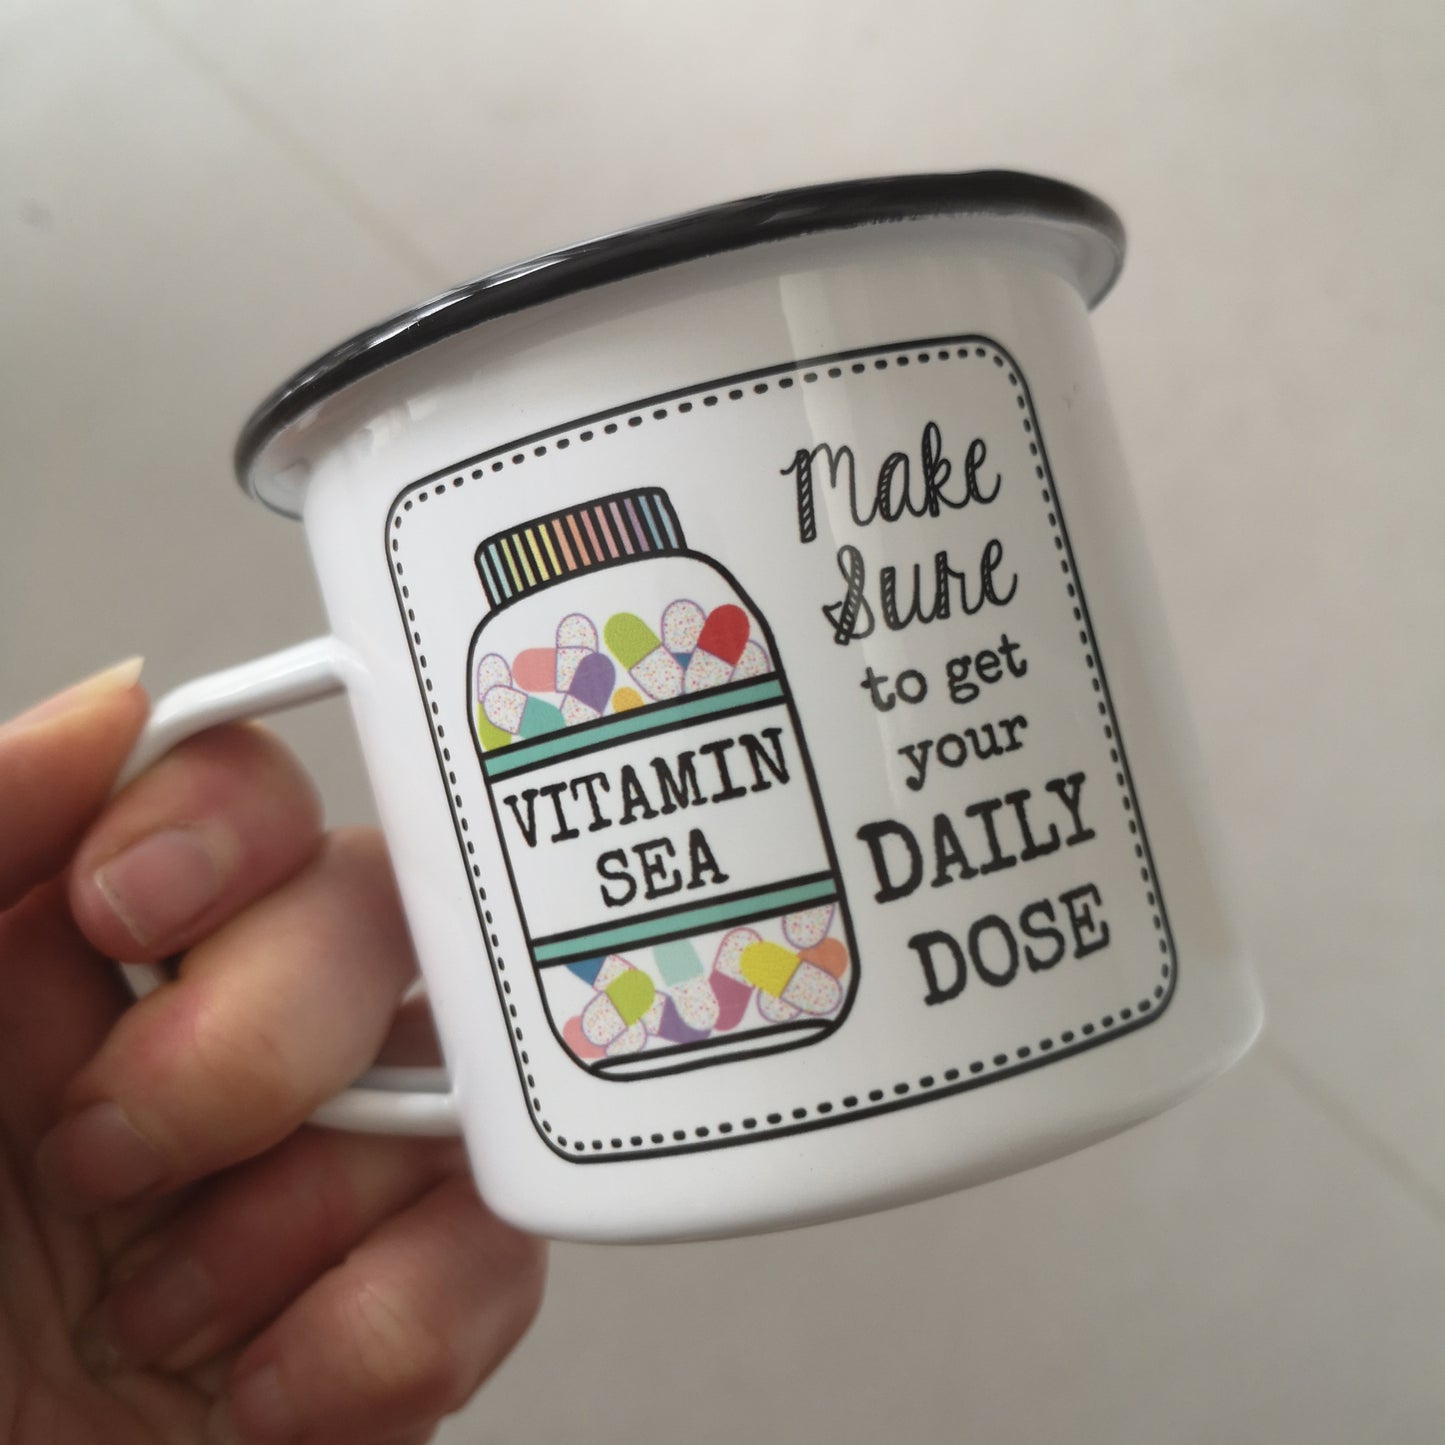 A photo of someone holding a White enamel mug with a black rim with the following on the front - a framed hand drawn image of a vitamin jar filled with brightly coloured pills and text to the right of it that says "make Sure to get your daily dose". The bottle has a VITAMIN SEA label on it.